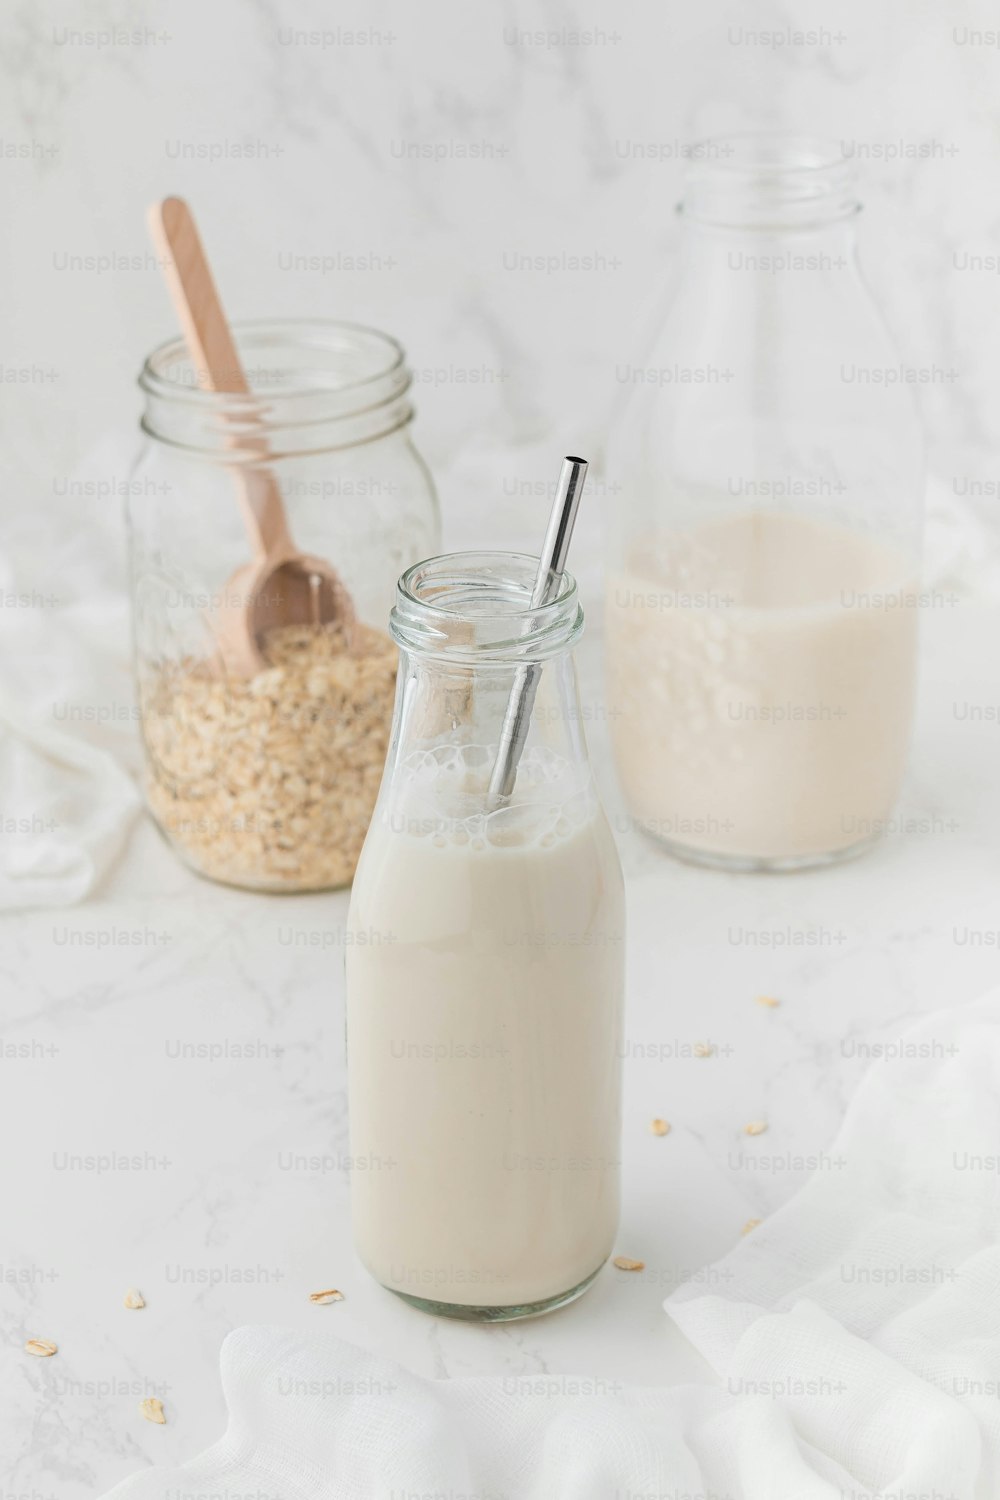 a bottle of milk and a jar of oatmeal